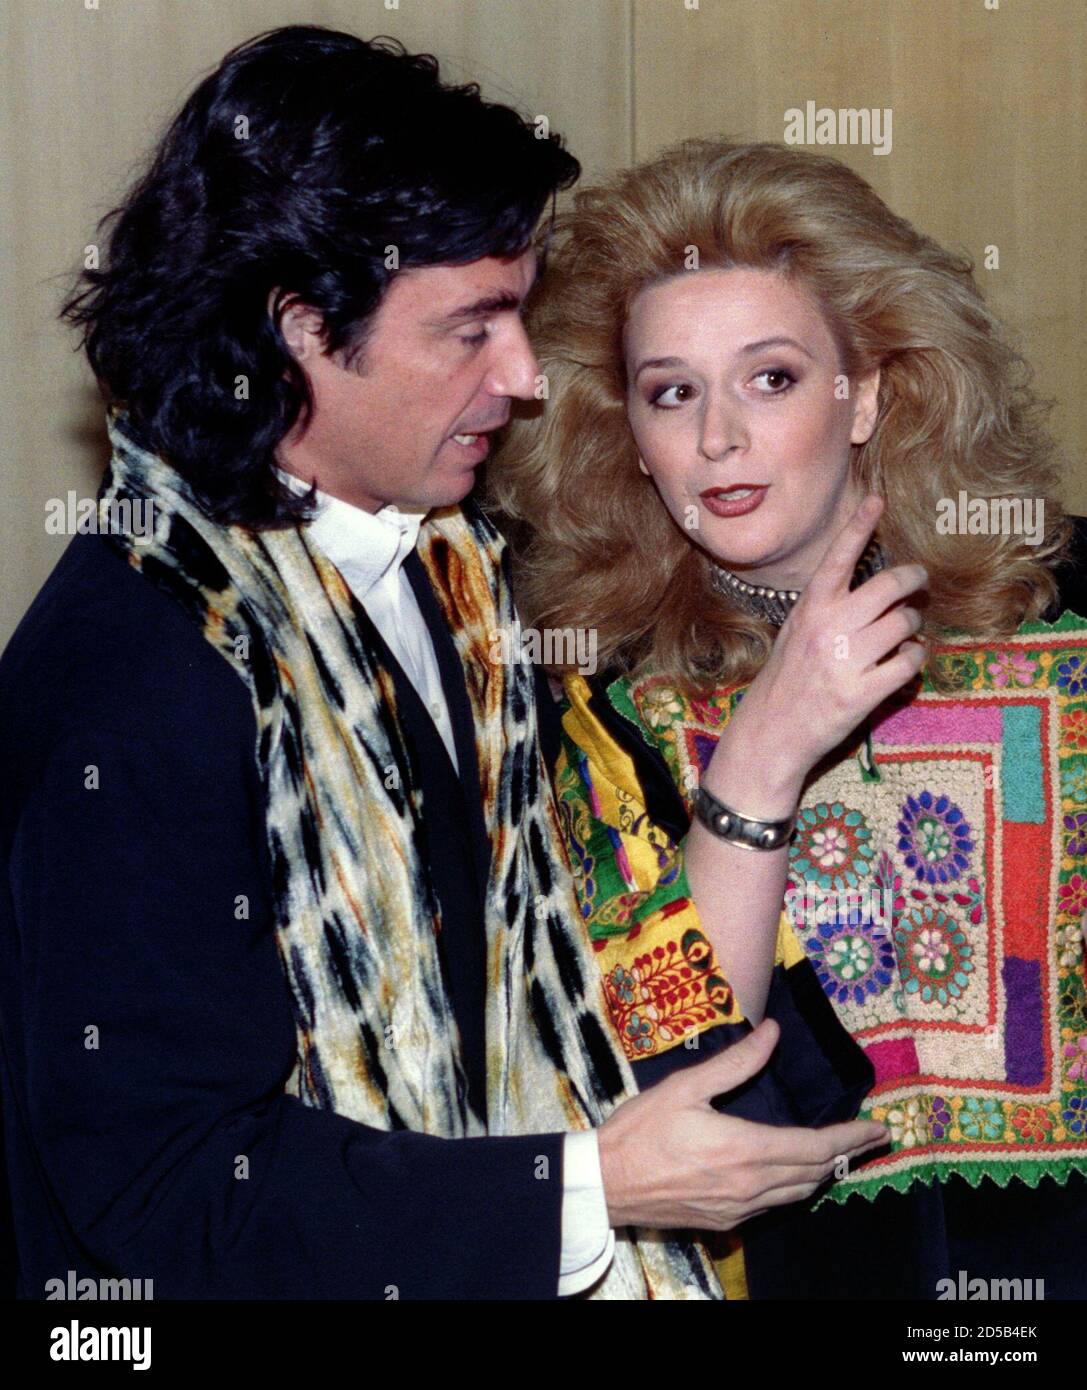 Suha Arafat (R) wife of PLO leader, leans towards French composer-musician  Jean-Michel Jarre (L) prior to the UNESCO gala, December 15th Stock Photo -  Alamy